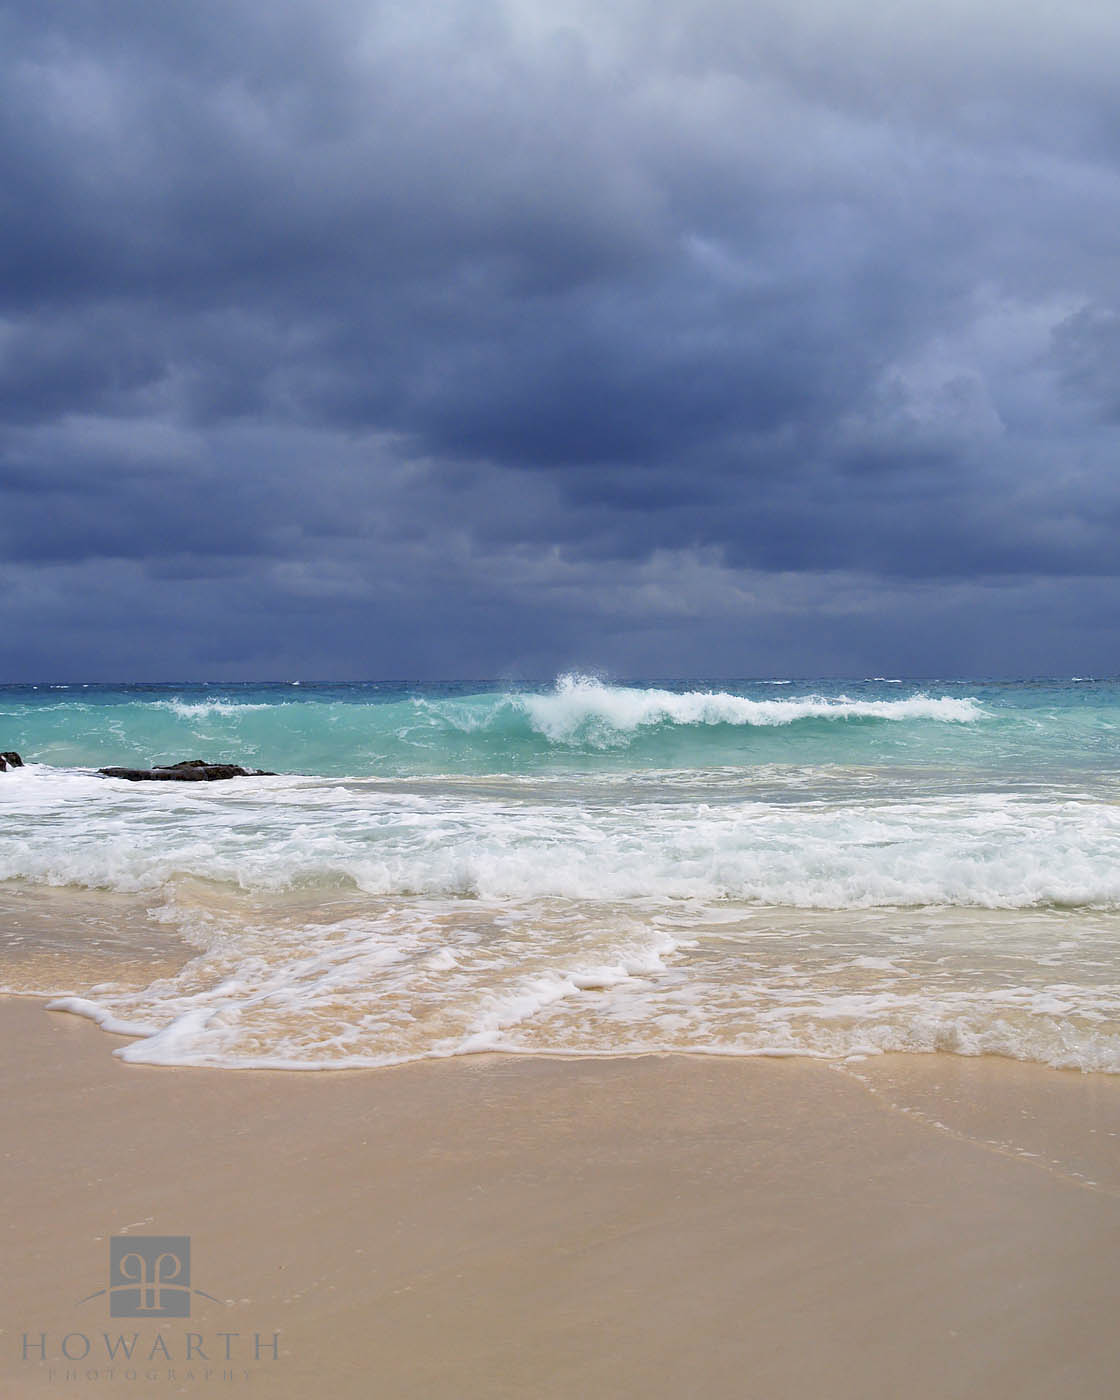 Heavy clouds build offshore as the surf rolls in